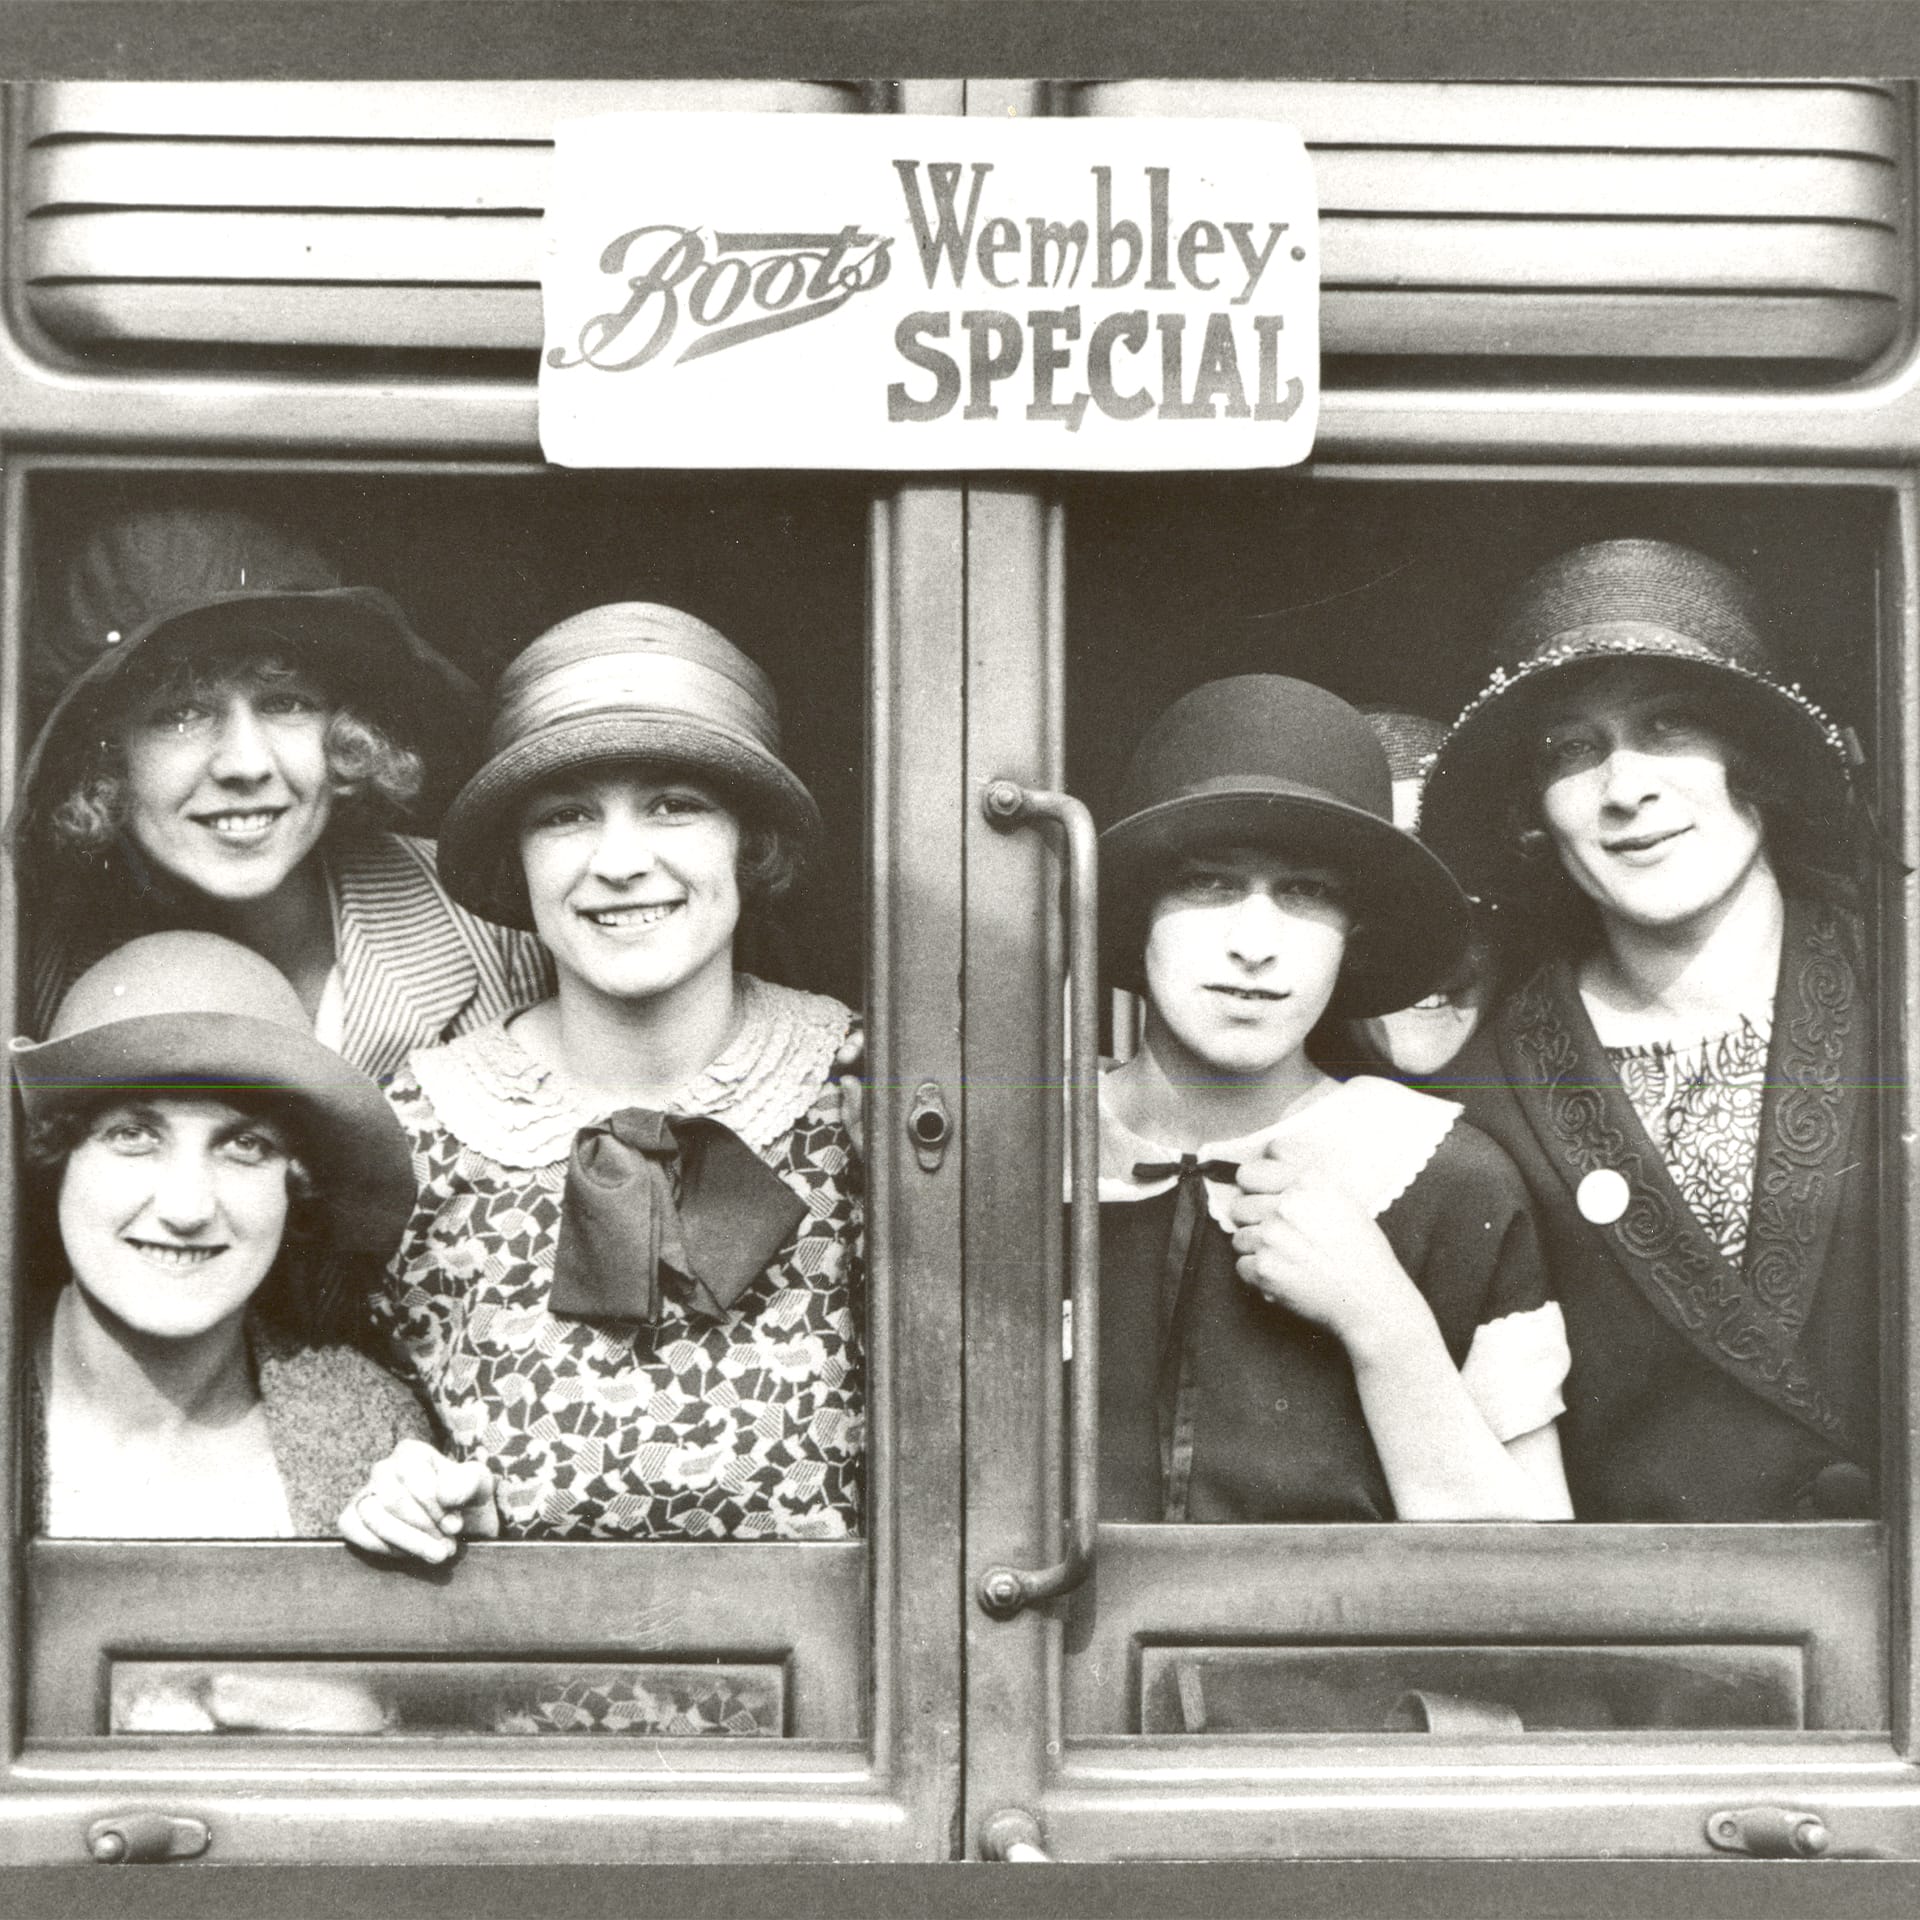 A black and white photo of a group of women in hats underneath a Boots sign that reads Wembley Special